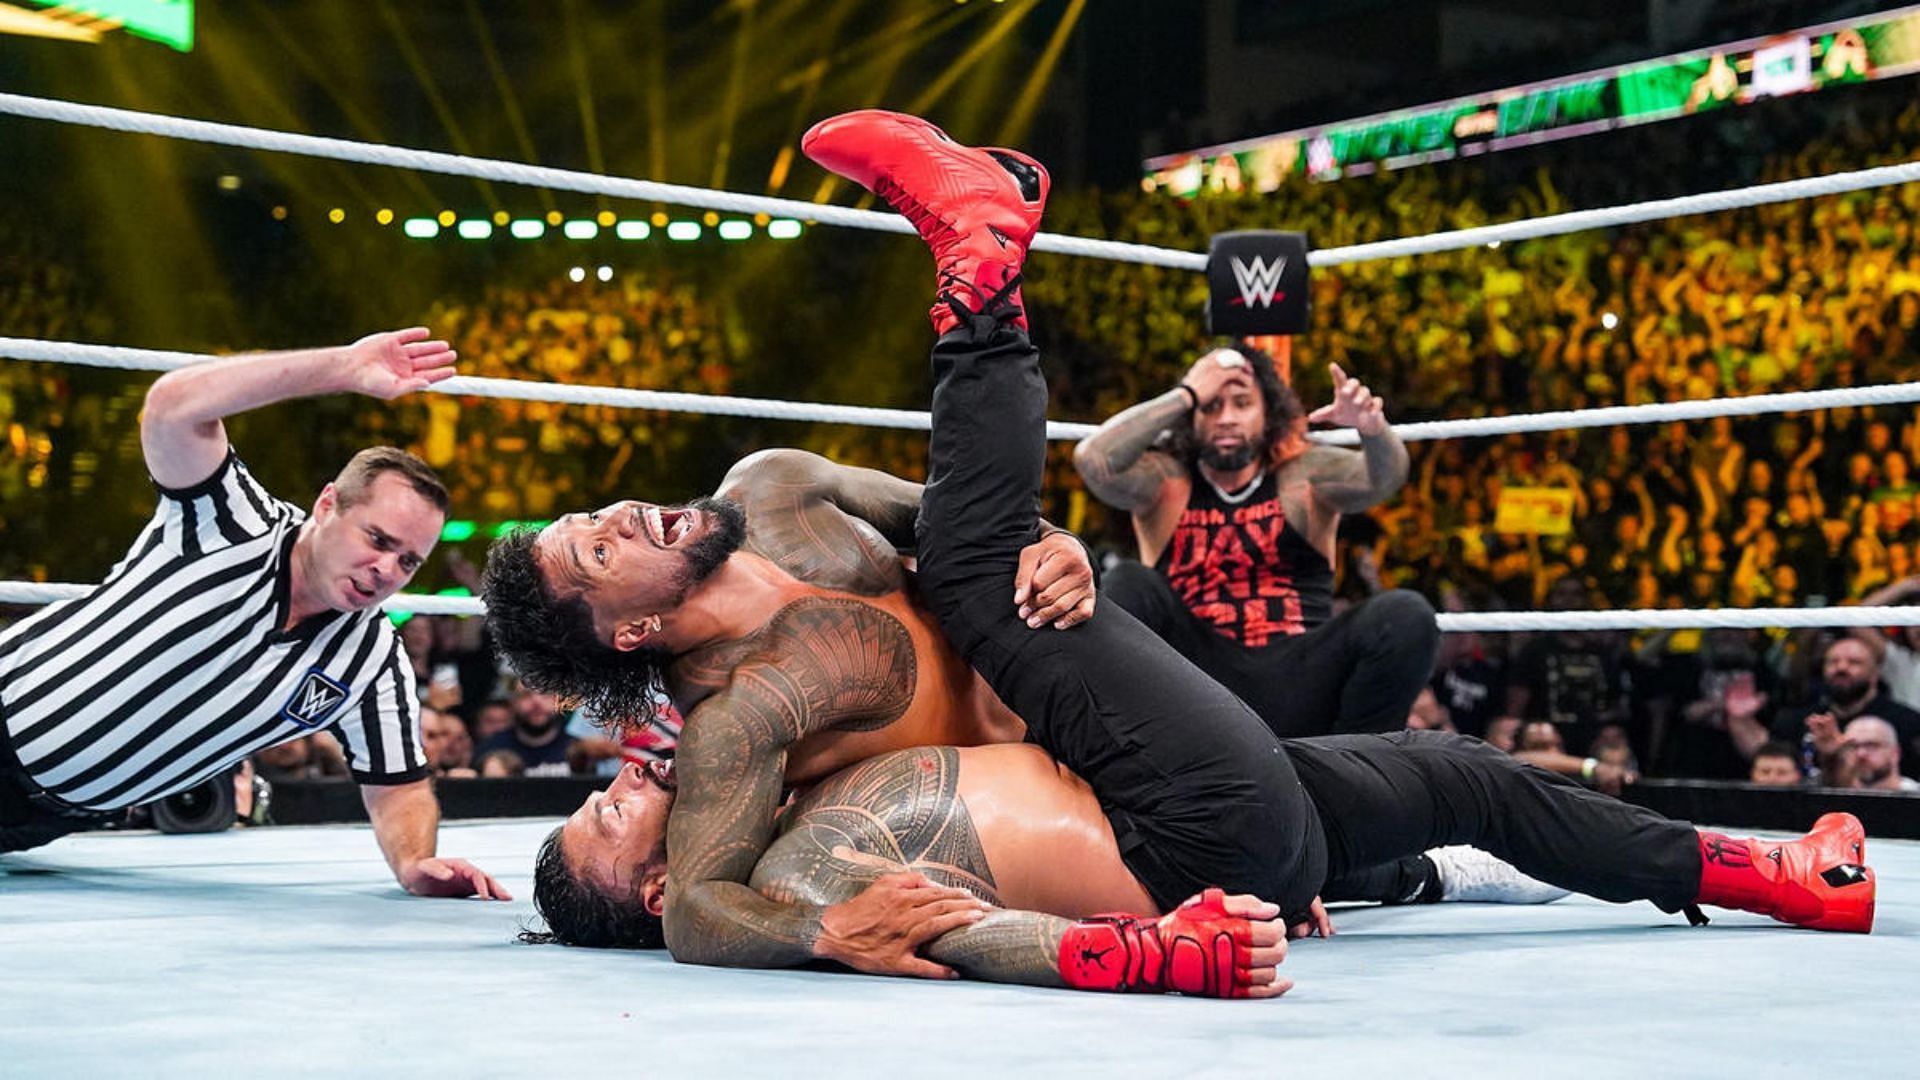 Miracles and surprises all night long at Money in the Bank.